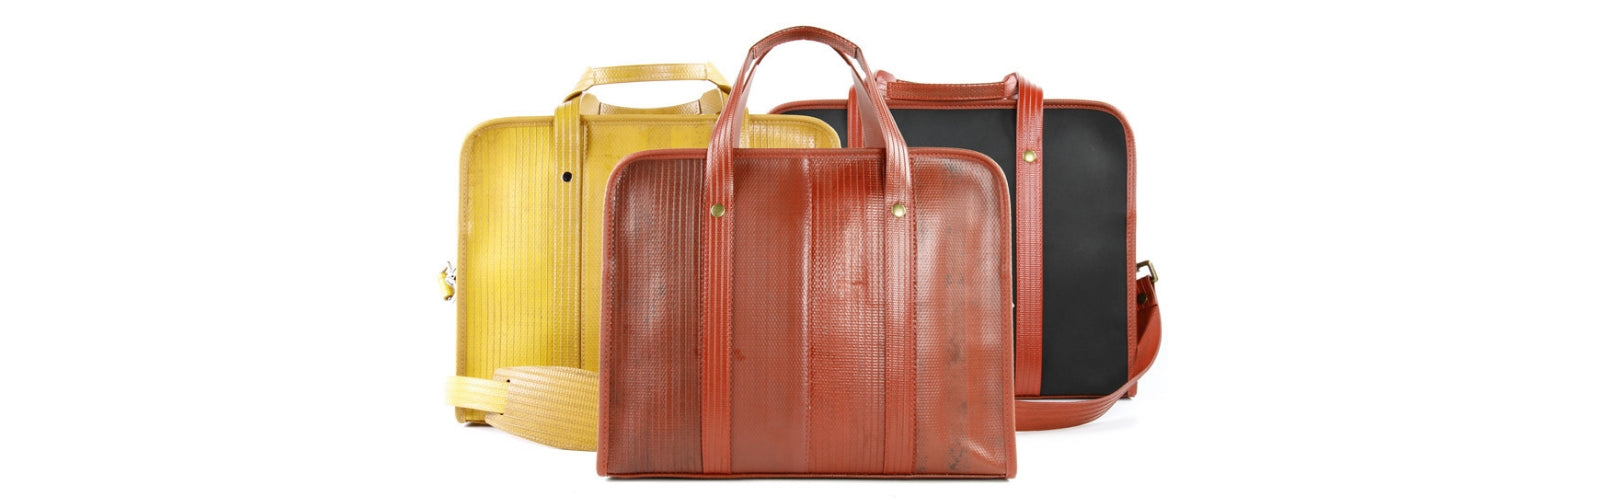 Eco-friendly recycled briefcases - upcyced fire-hose and printing blanket - Elvis & Kresse